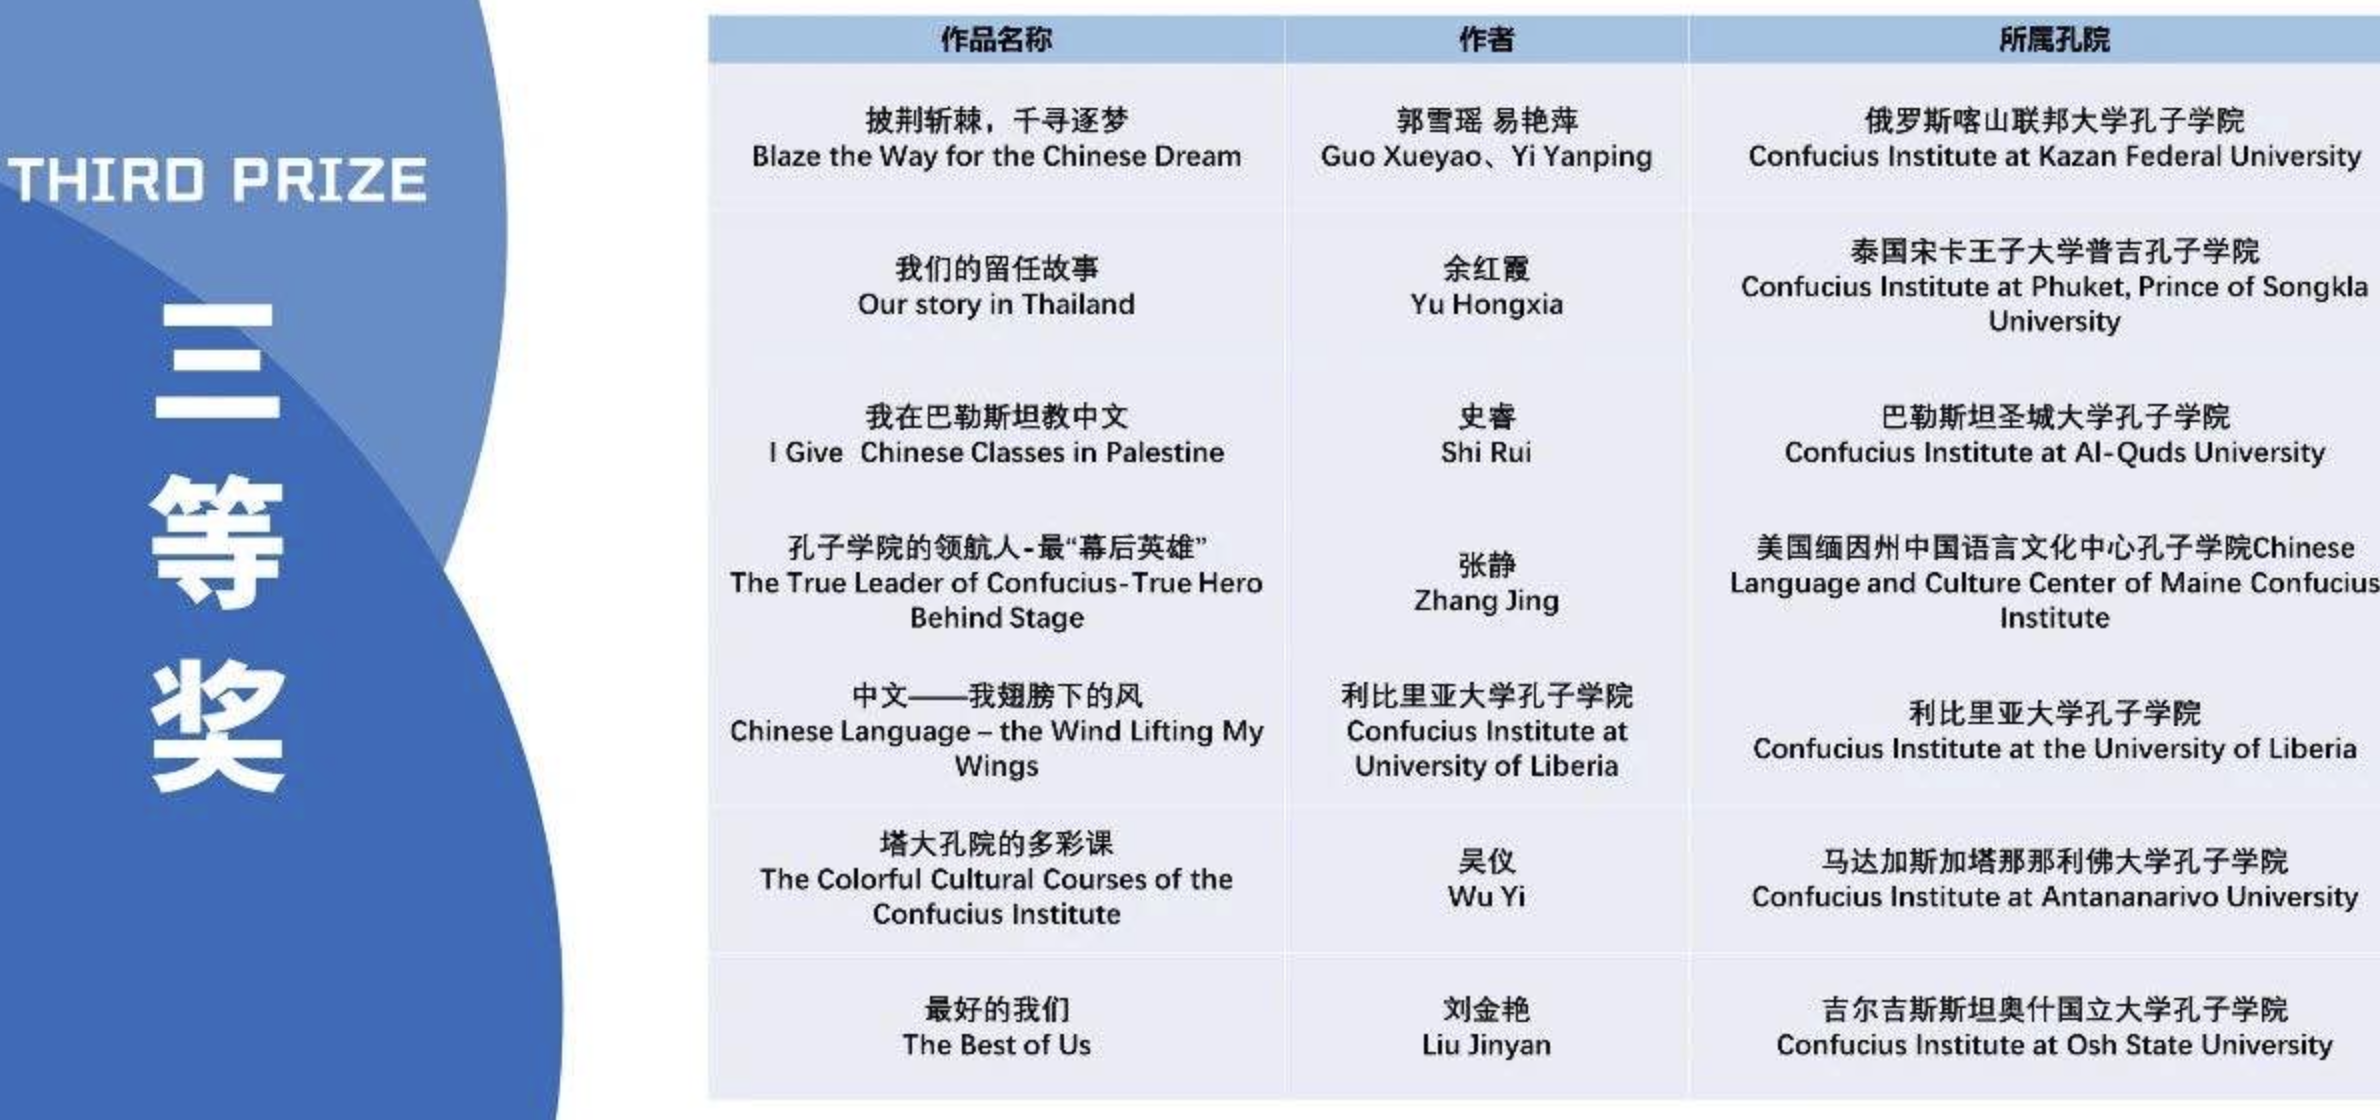 The work of a teacher from the Confucius Institute won the Third Prize in the third “Most Confucius Institute” global short video collection